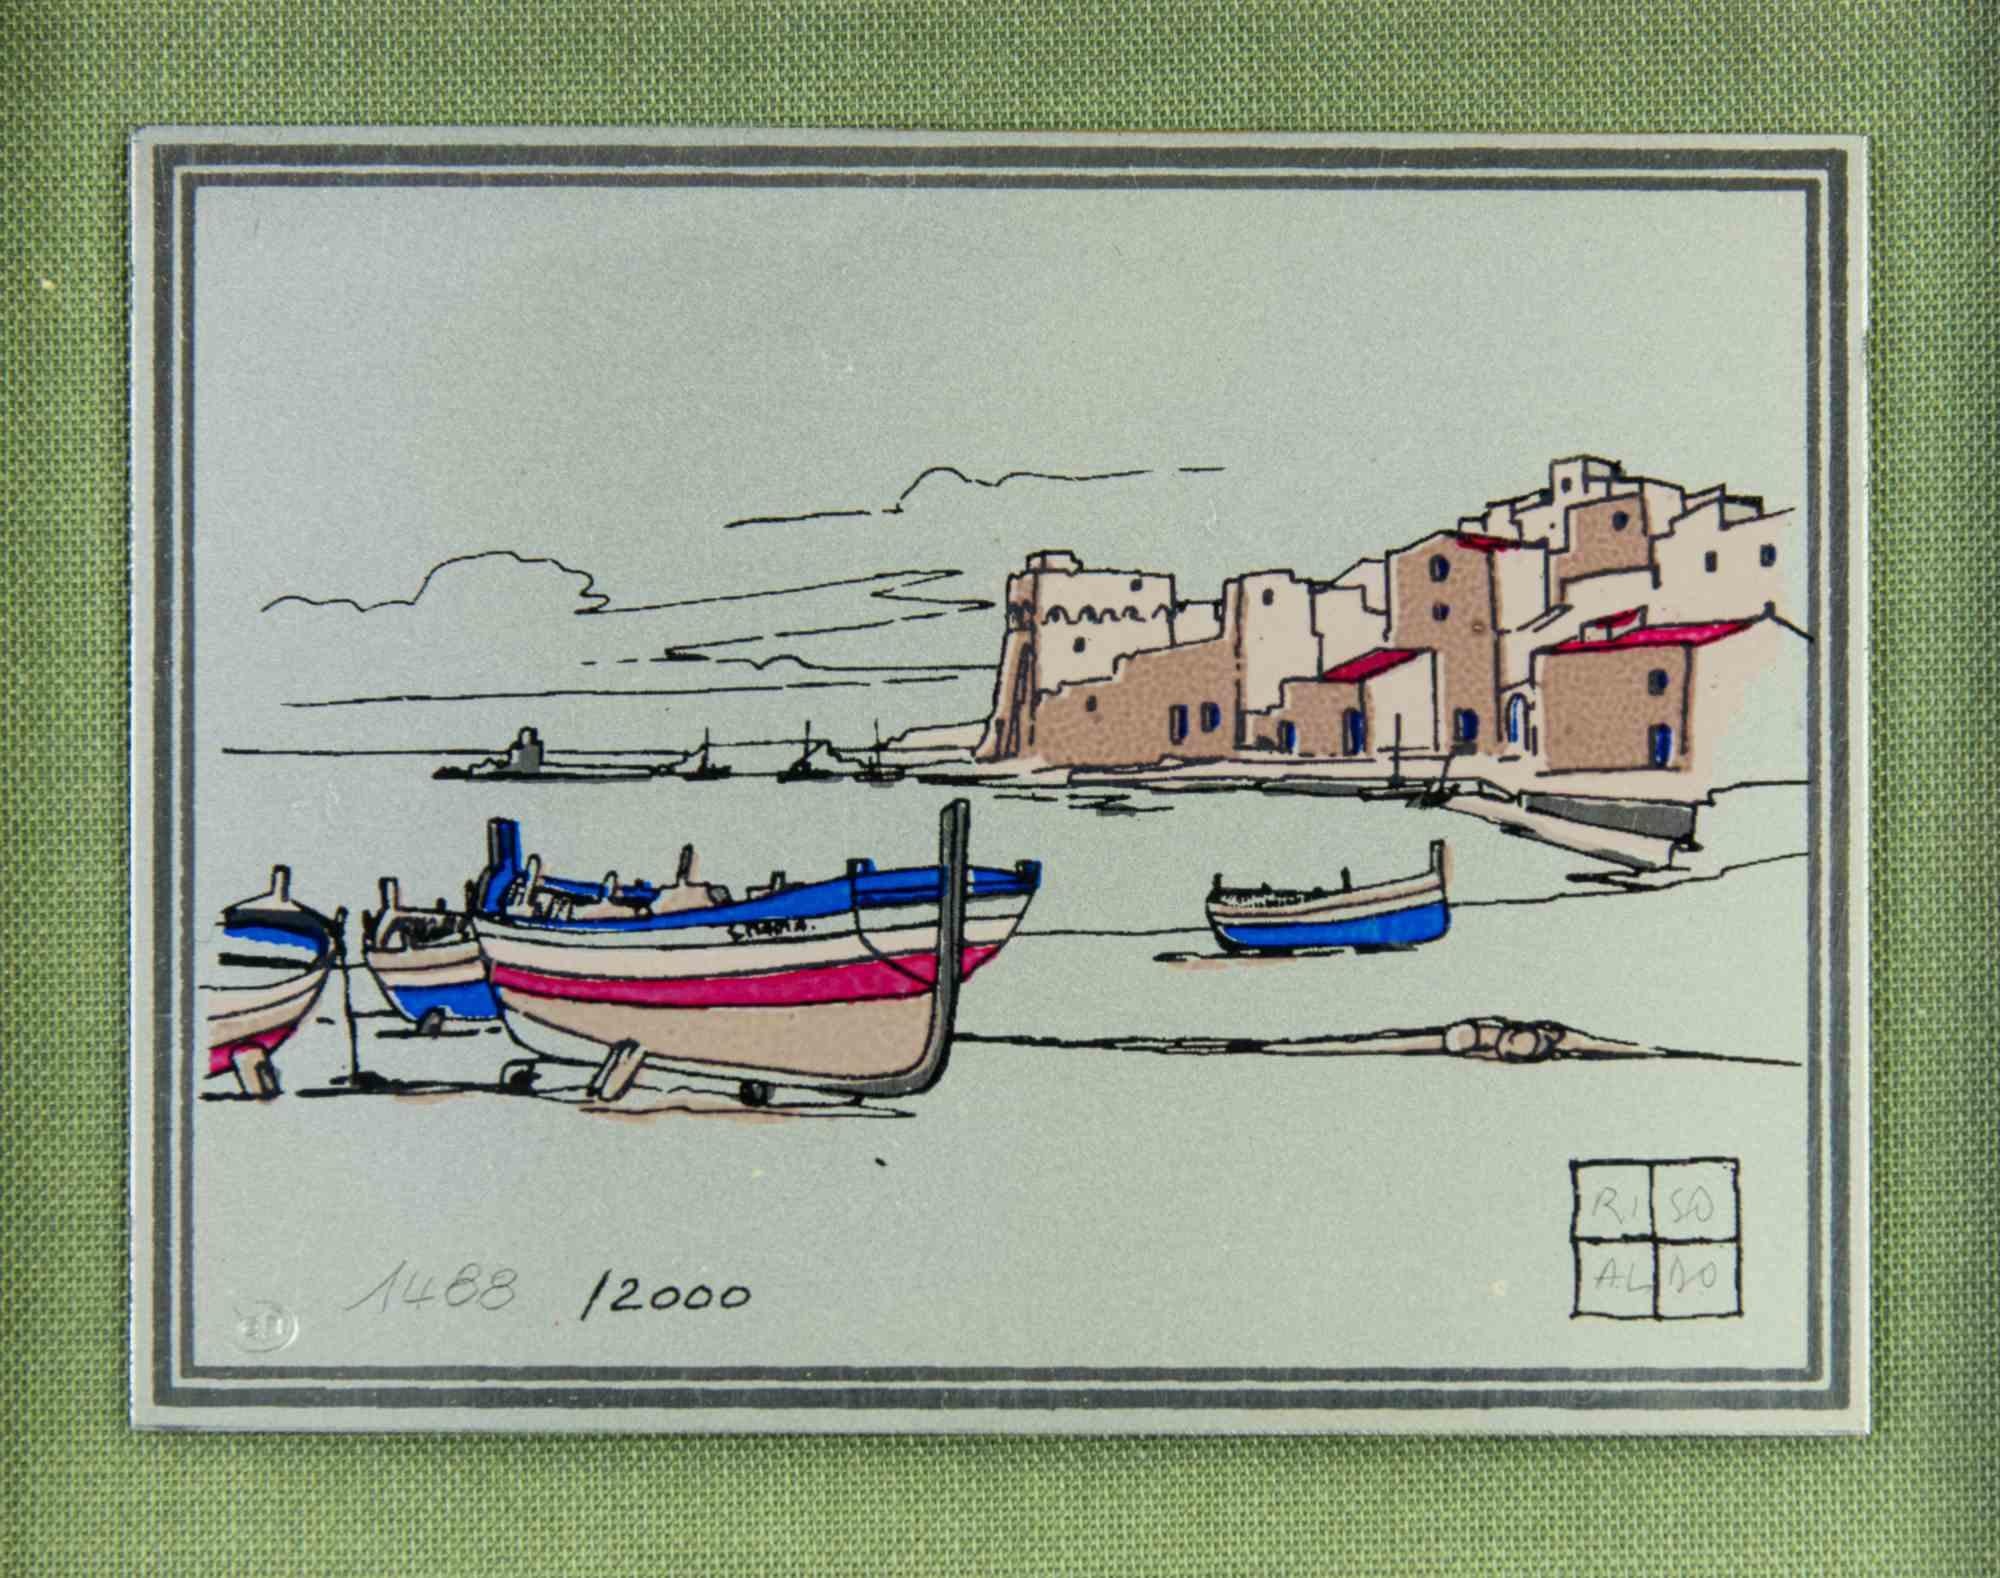 Boats on the Seaside - Sérigraphie d'Aldo Riso - 1970